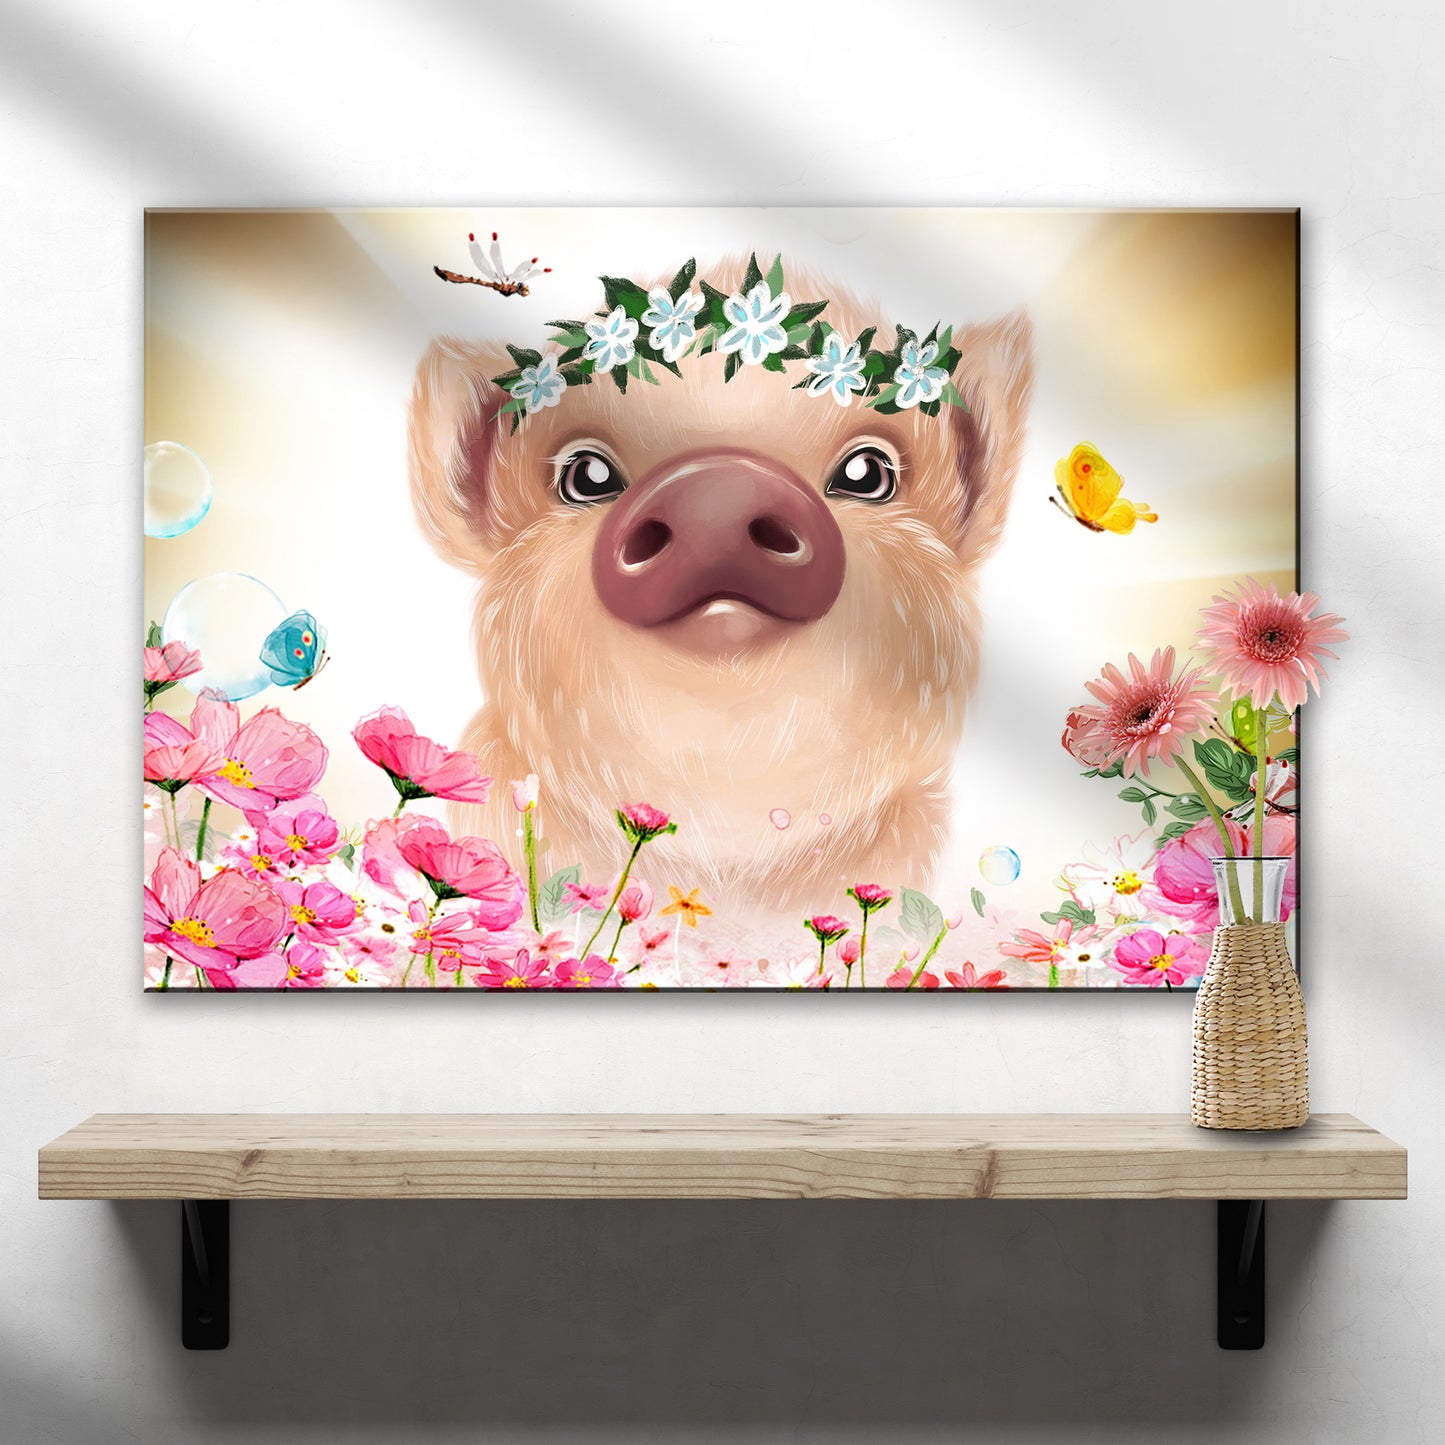 Flower Crown Pig Canvas Wall Art - Image by Tailored Canvases